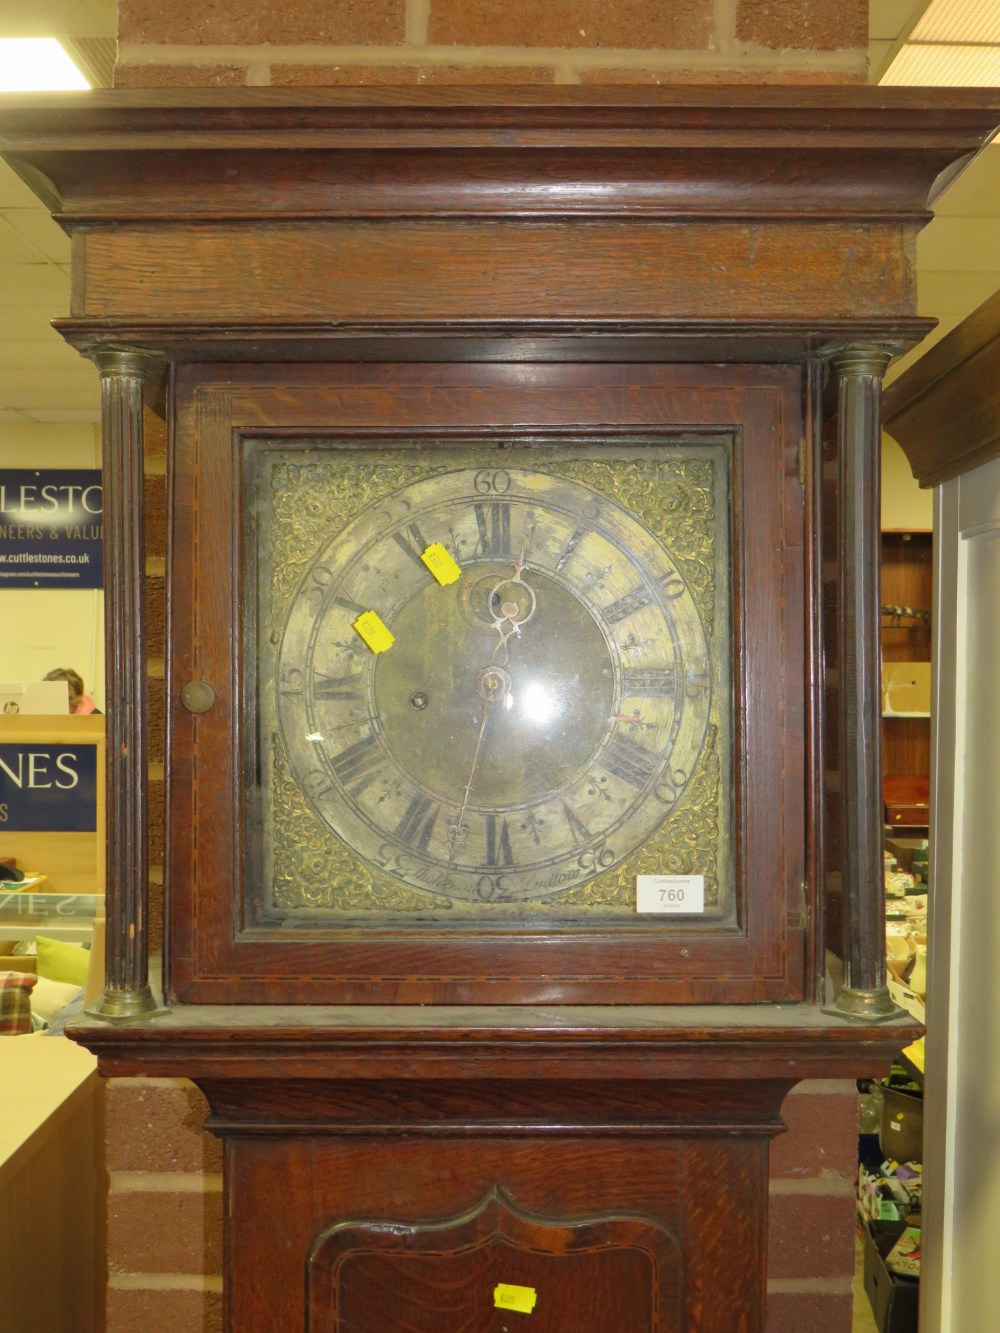 AN ANTIQUE OAK BRASS FACED LONGCASE CLOCK BY THOMAS VERNON OF LUDLOW - WITH EIGHT DAY MOVEMENT - - Image 2 of 9